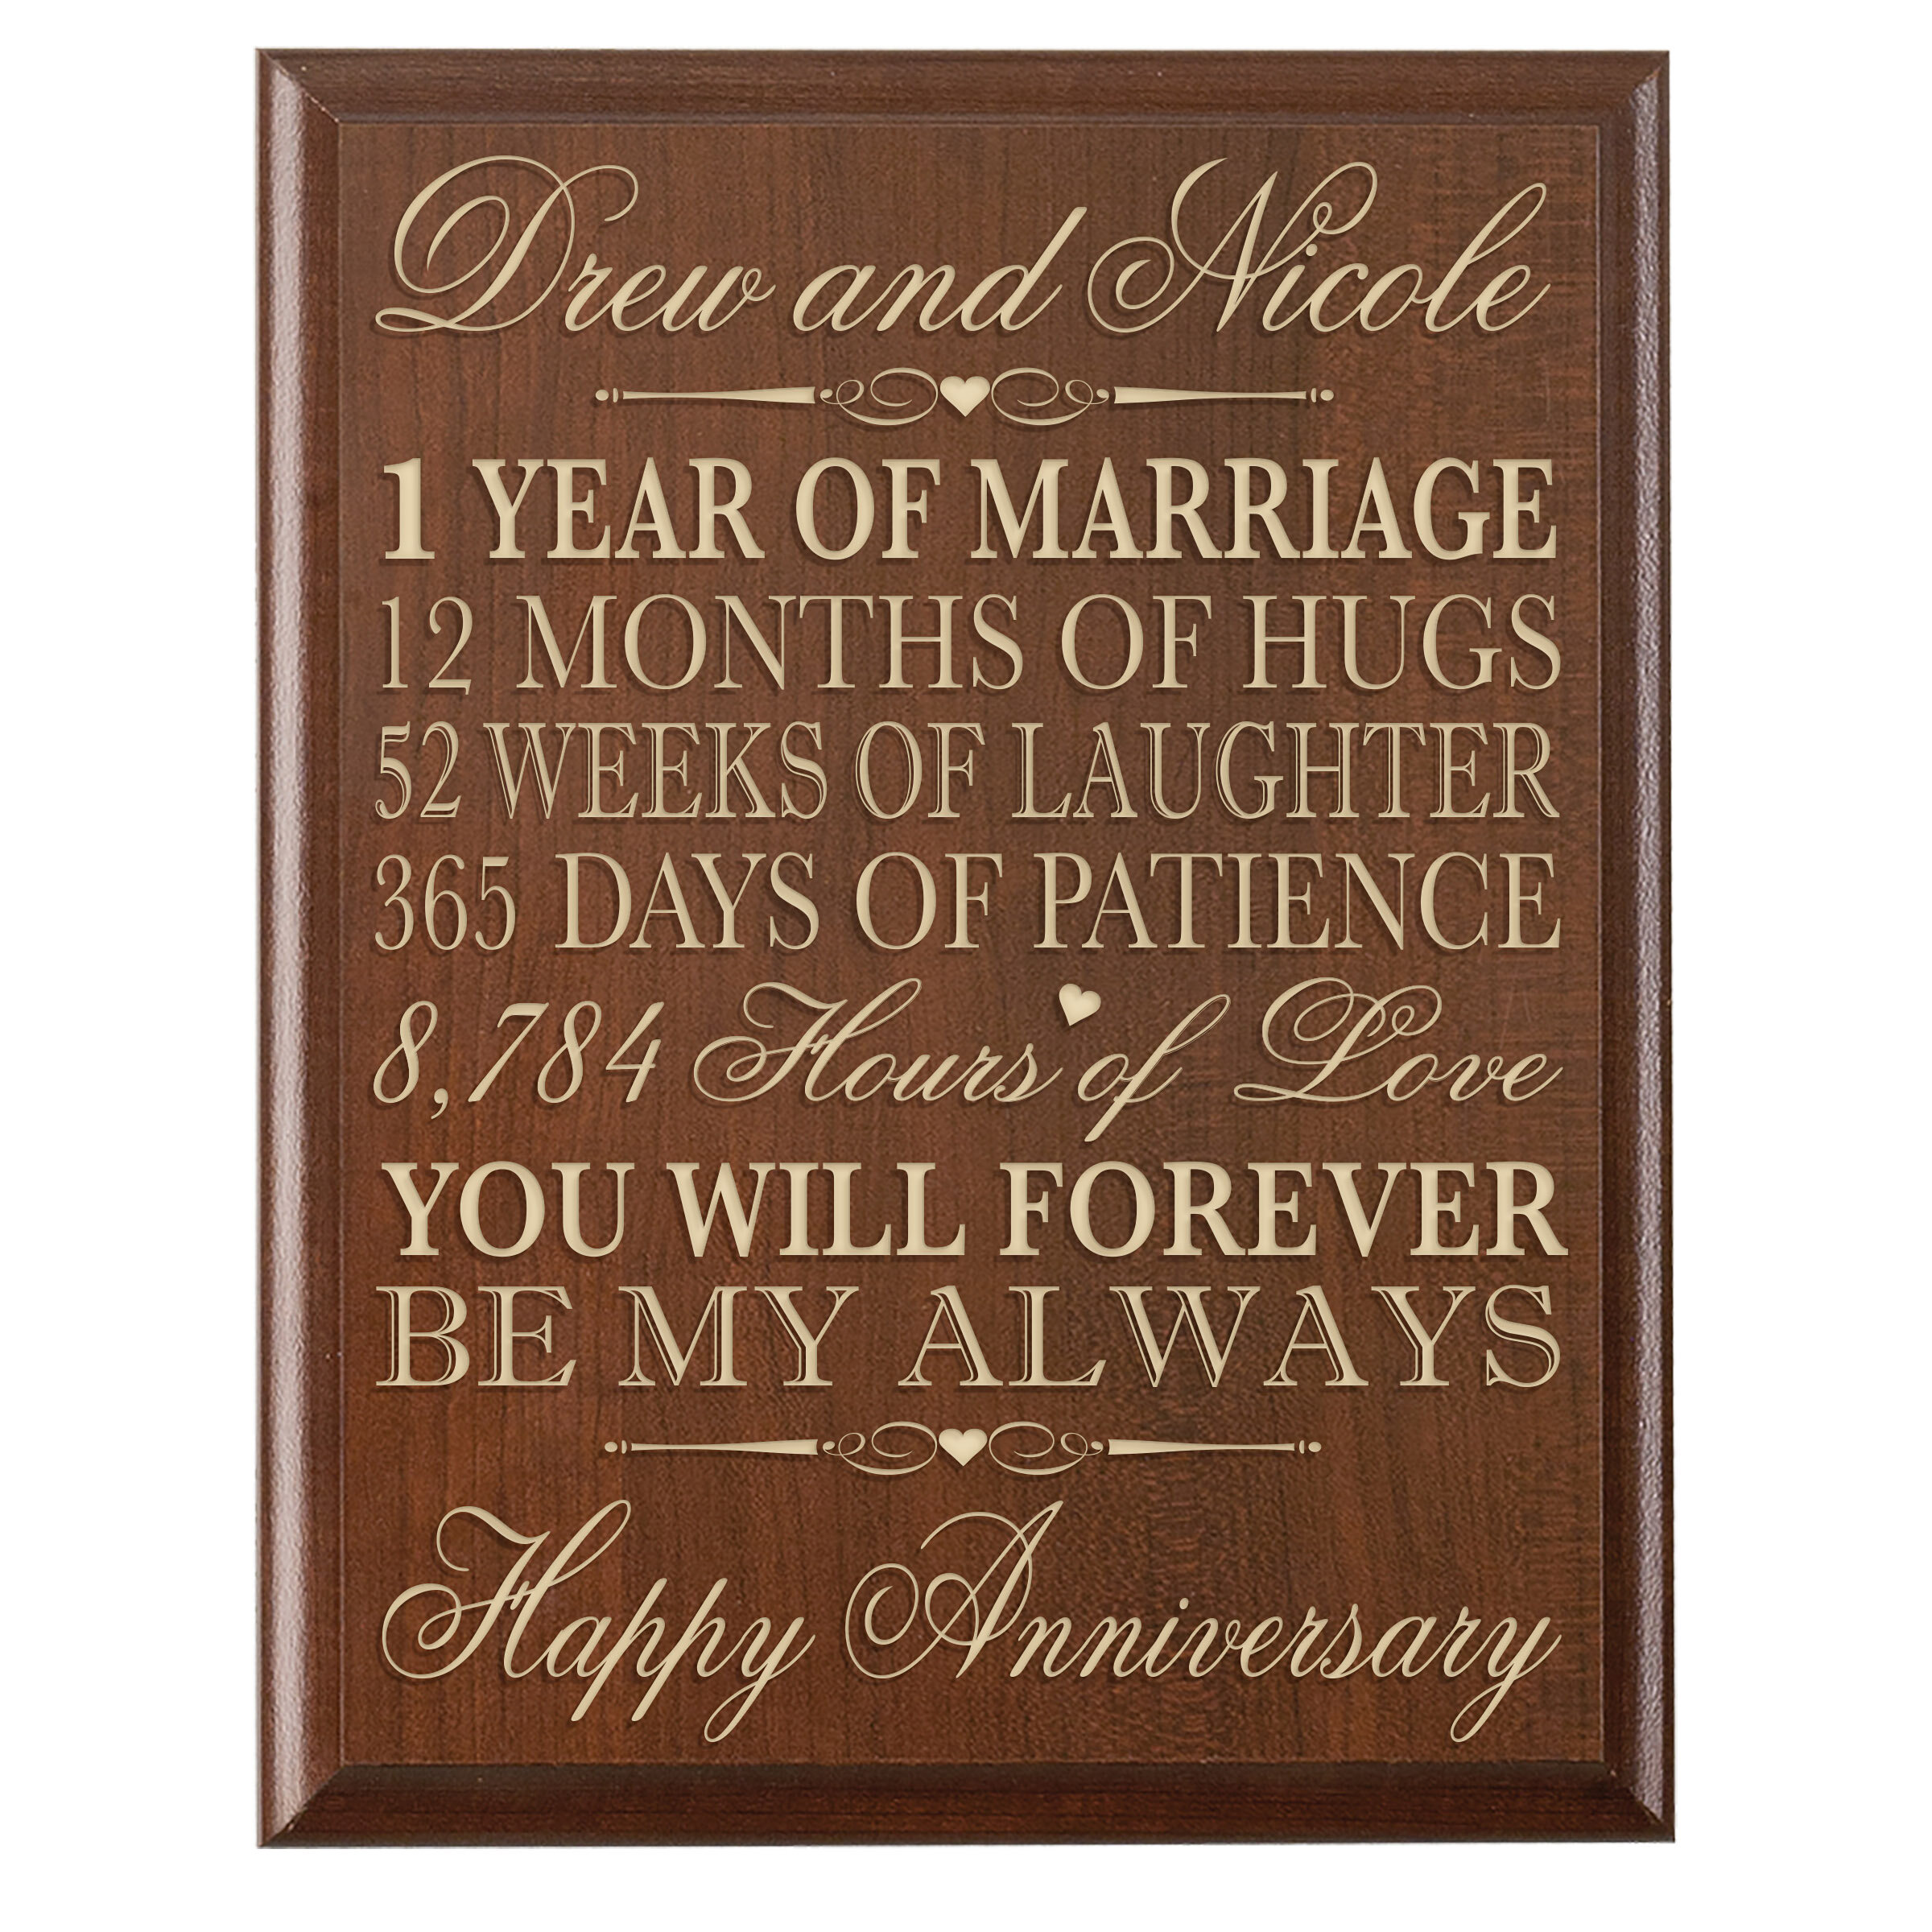 Home Living Home Decor Wedding Picture Frame Rustic Bedroom Wall Decor Bedroom Wall Decor Wedding Photo Frame You Will Forever Be My Always Anniversary Gift